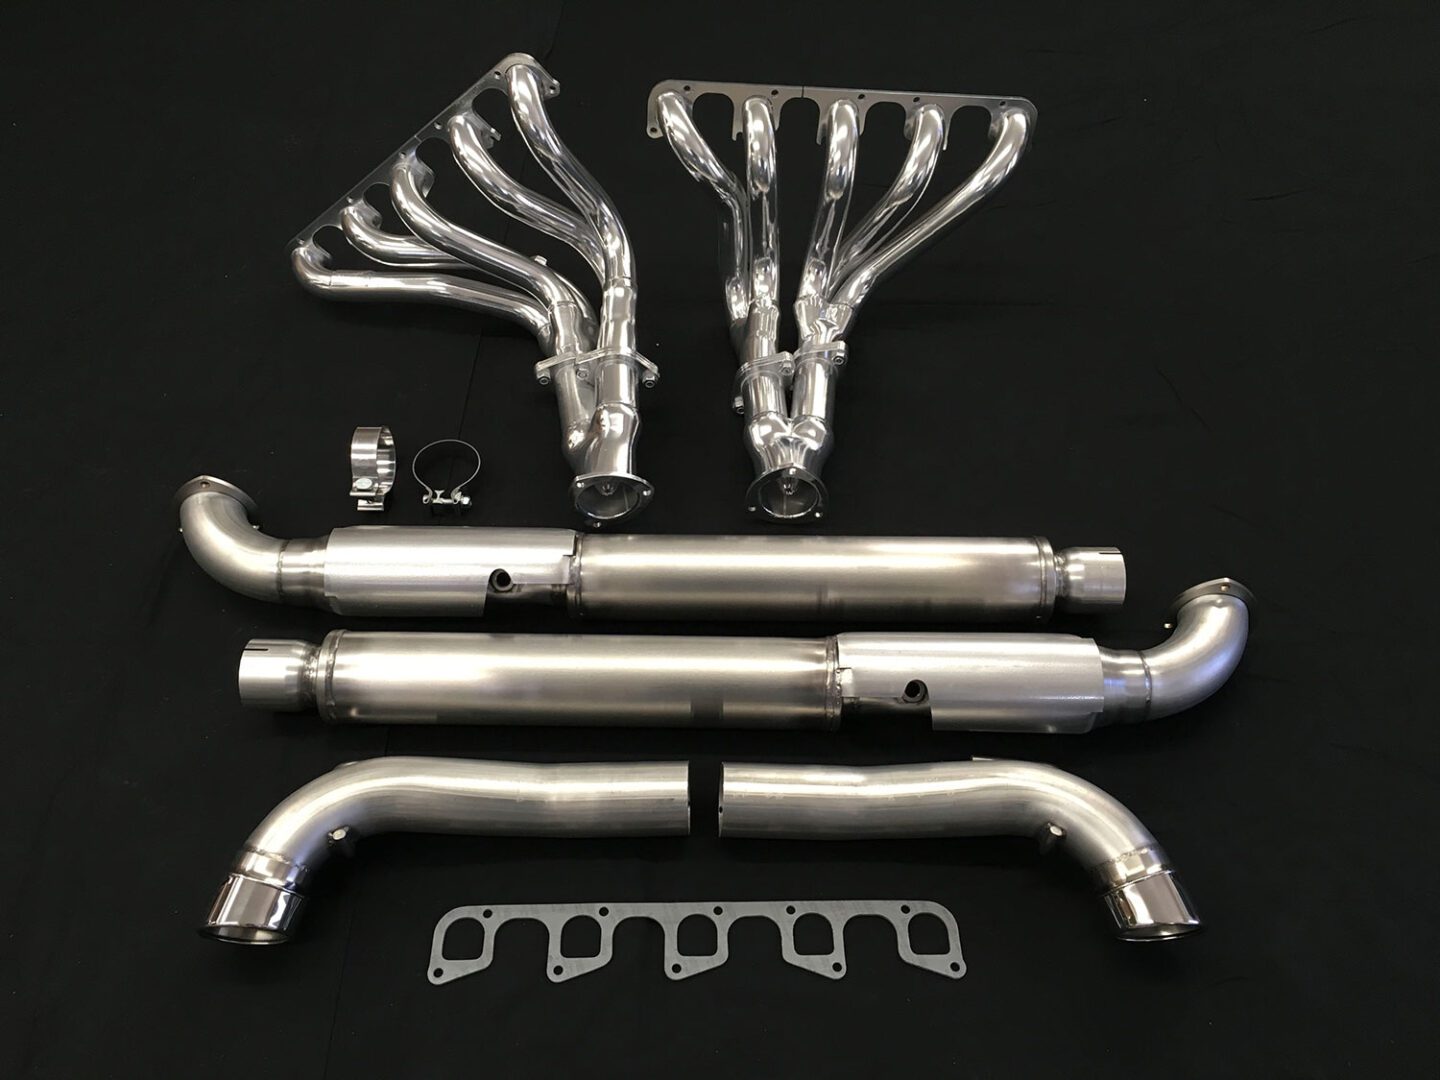 A set of exhaust pipes and headers are shown.